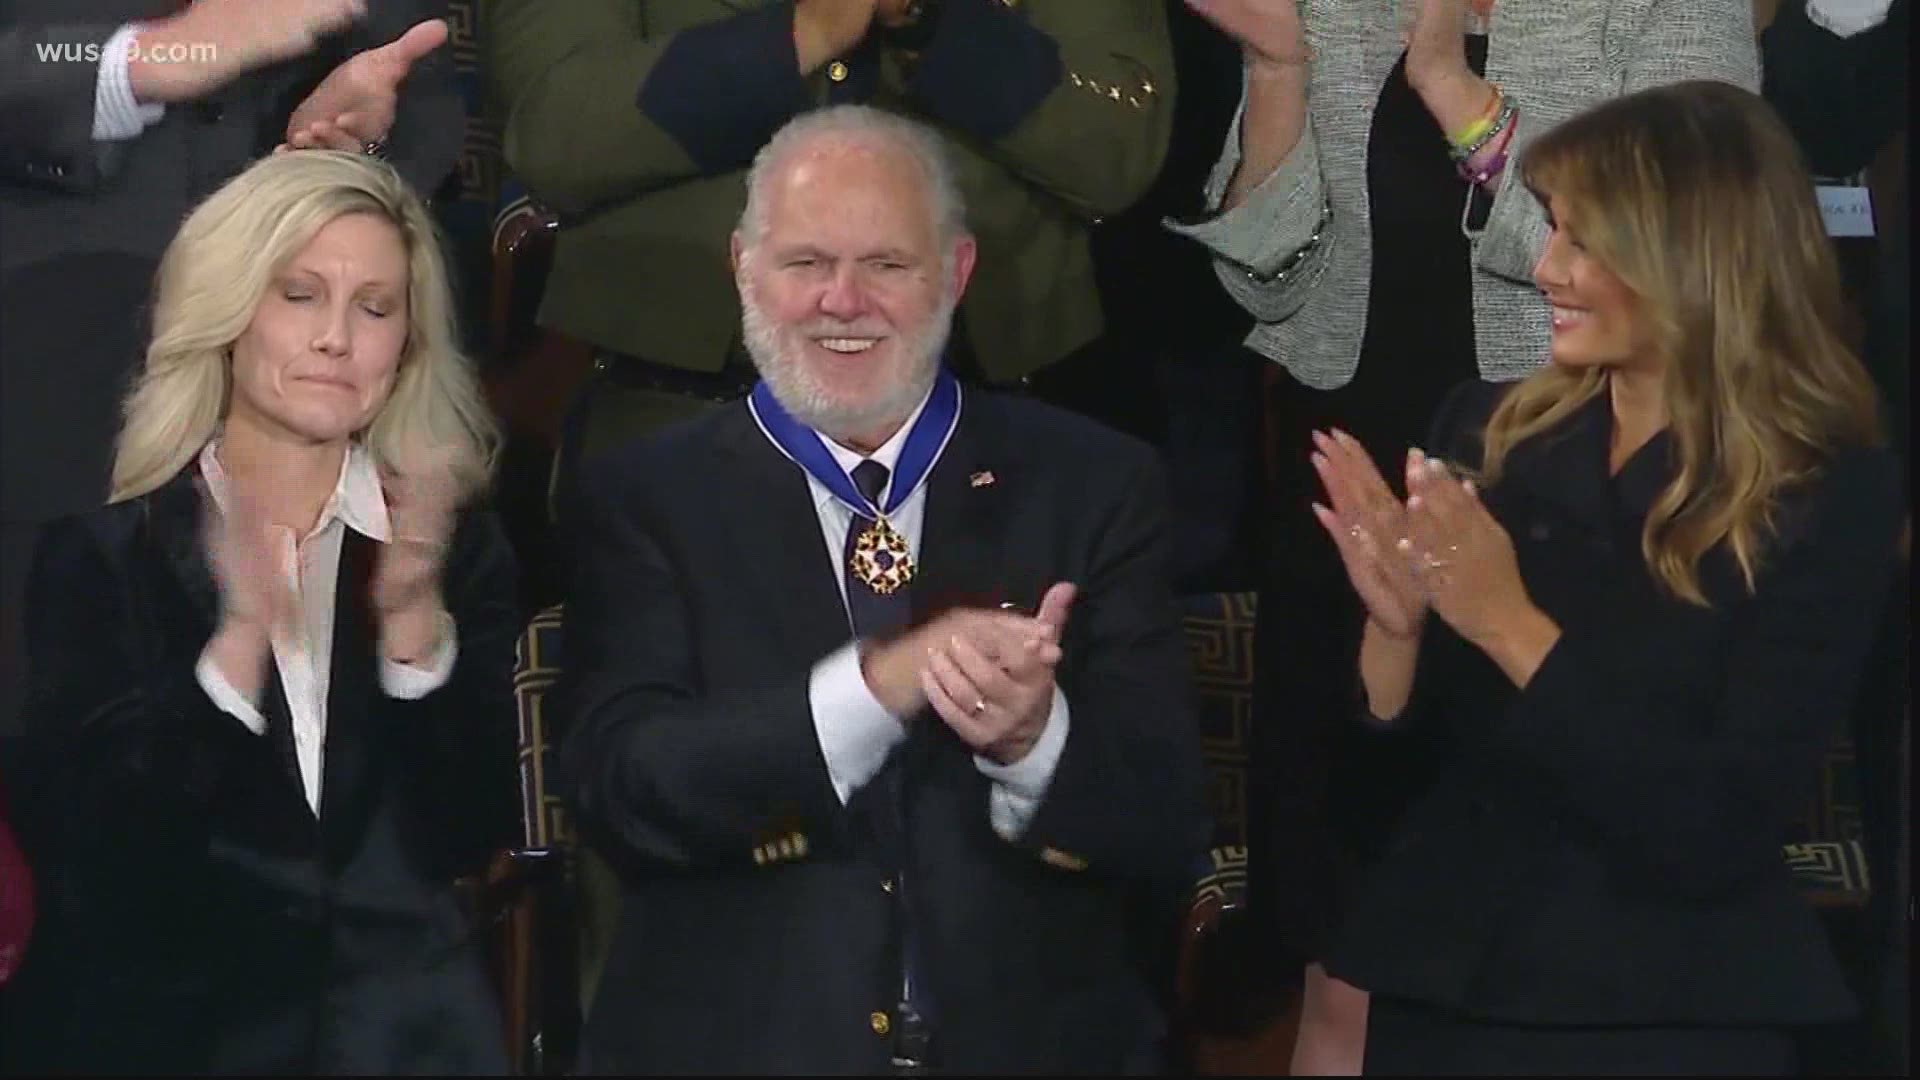 Limbaugh first announced he was diagnosed with advanced lung cancer on Feb. 3, 2020. The following day Trump awarded him the Presidential Medal of Freedom.